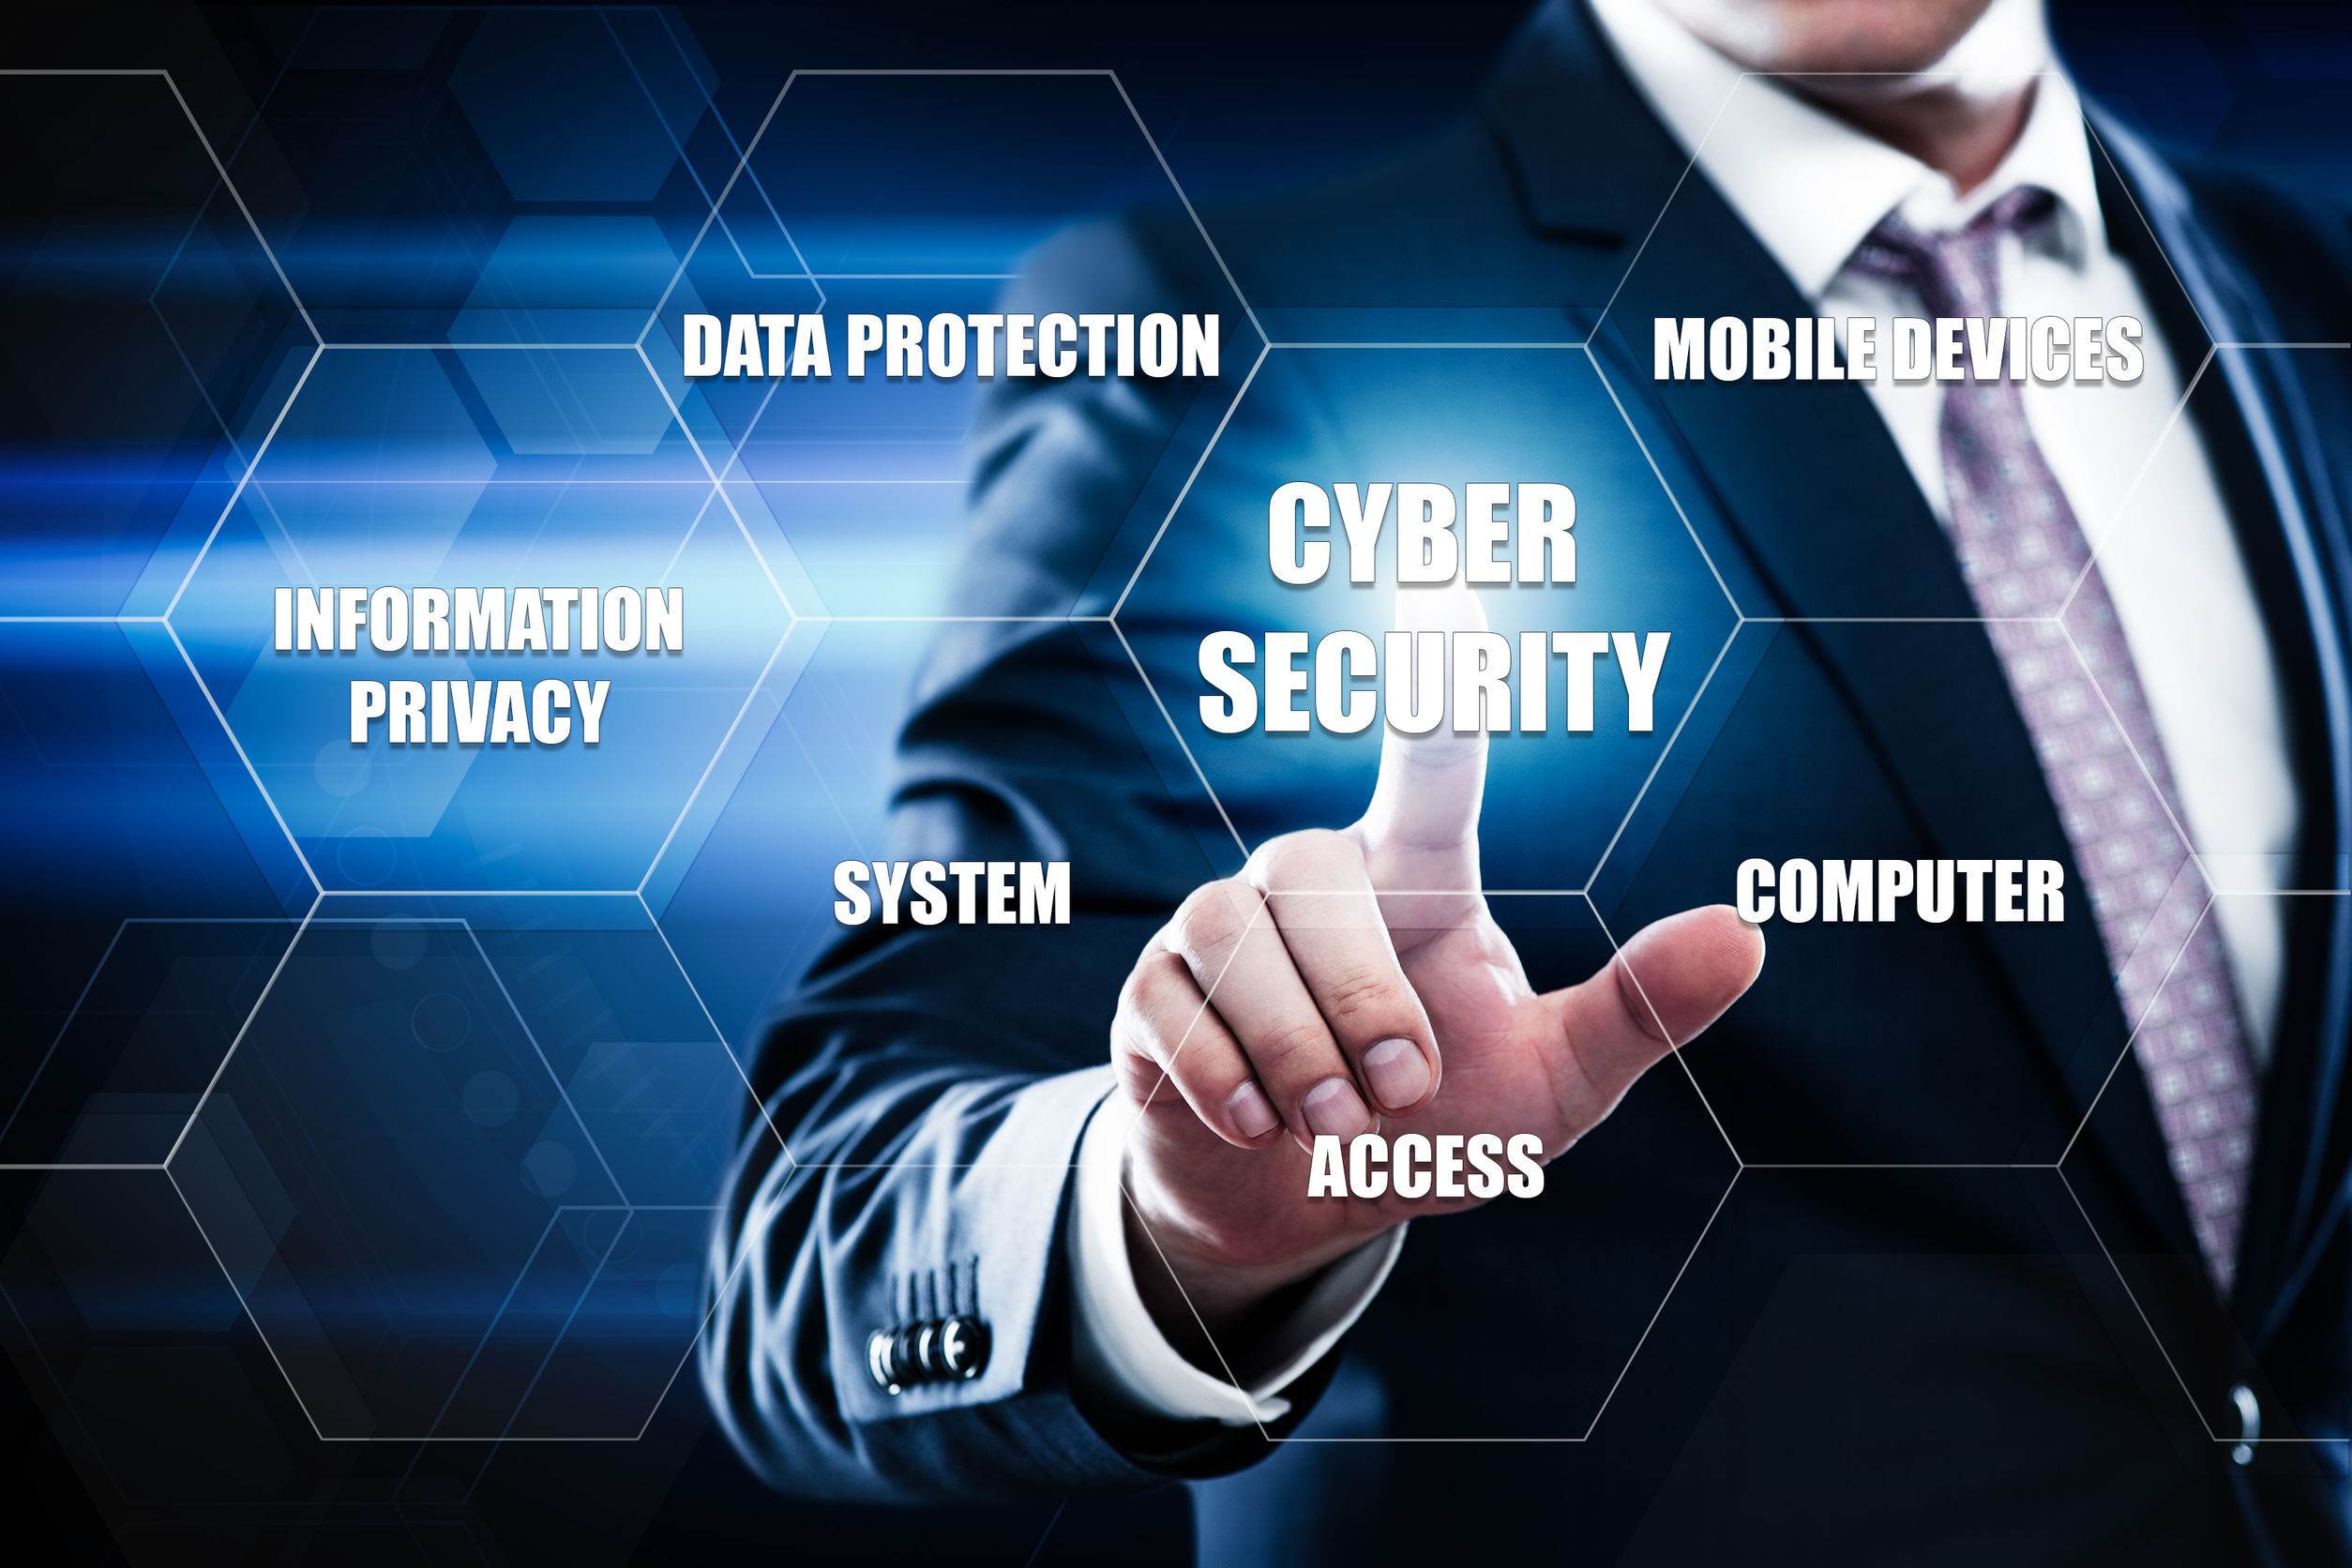 Man in suit pointing at Cybersecurity sign.